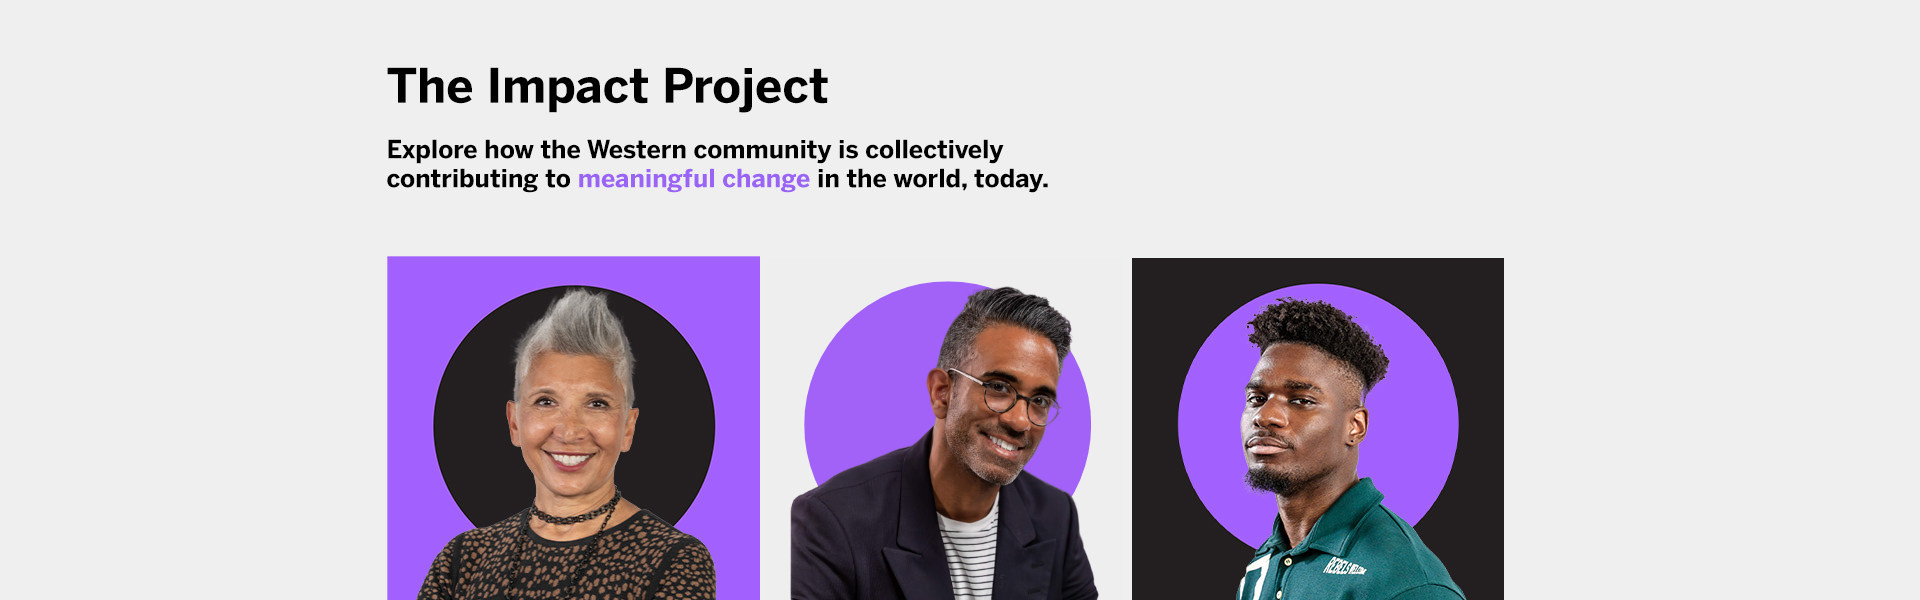 The Impact Project - Explore how the Western Community is collectively contributing to meaningful change in the world, today. 